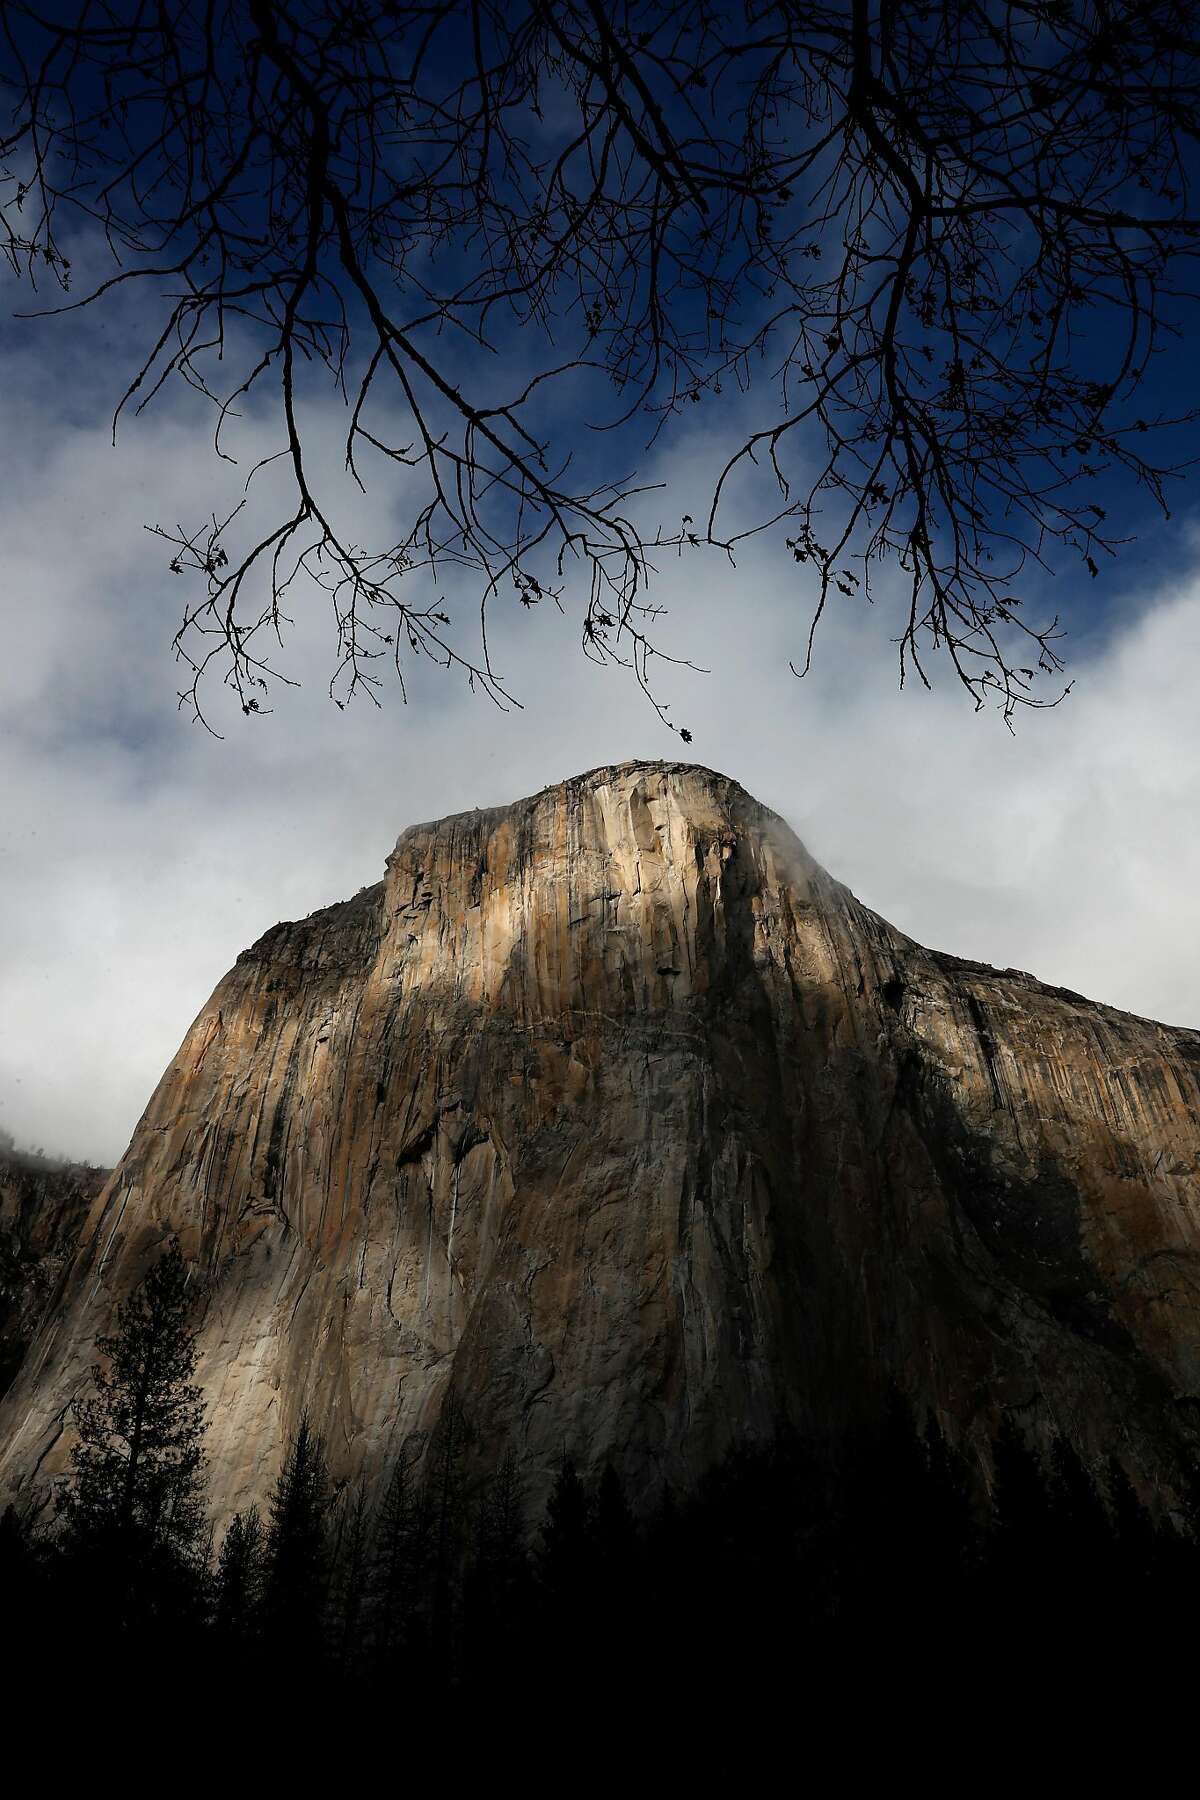 El Capitan in Yosemite National Park, in Yosemite, Calif., on Monday Jan. 22, 2018. The National Park is hoping to return to full staff soon after the US Senate voted to end the Federal government shutdown today.